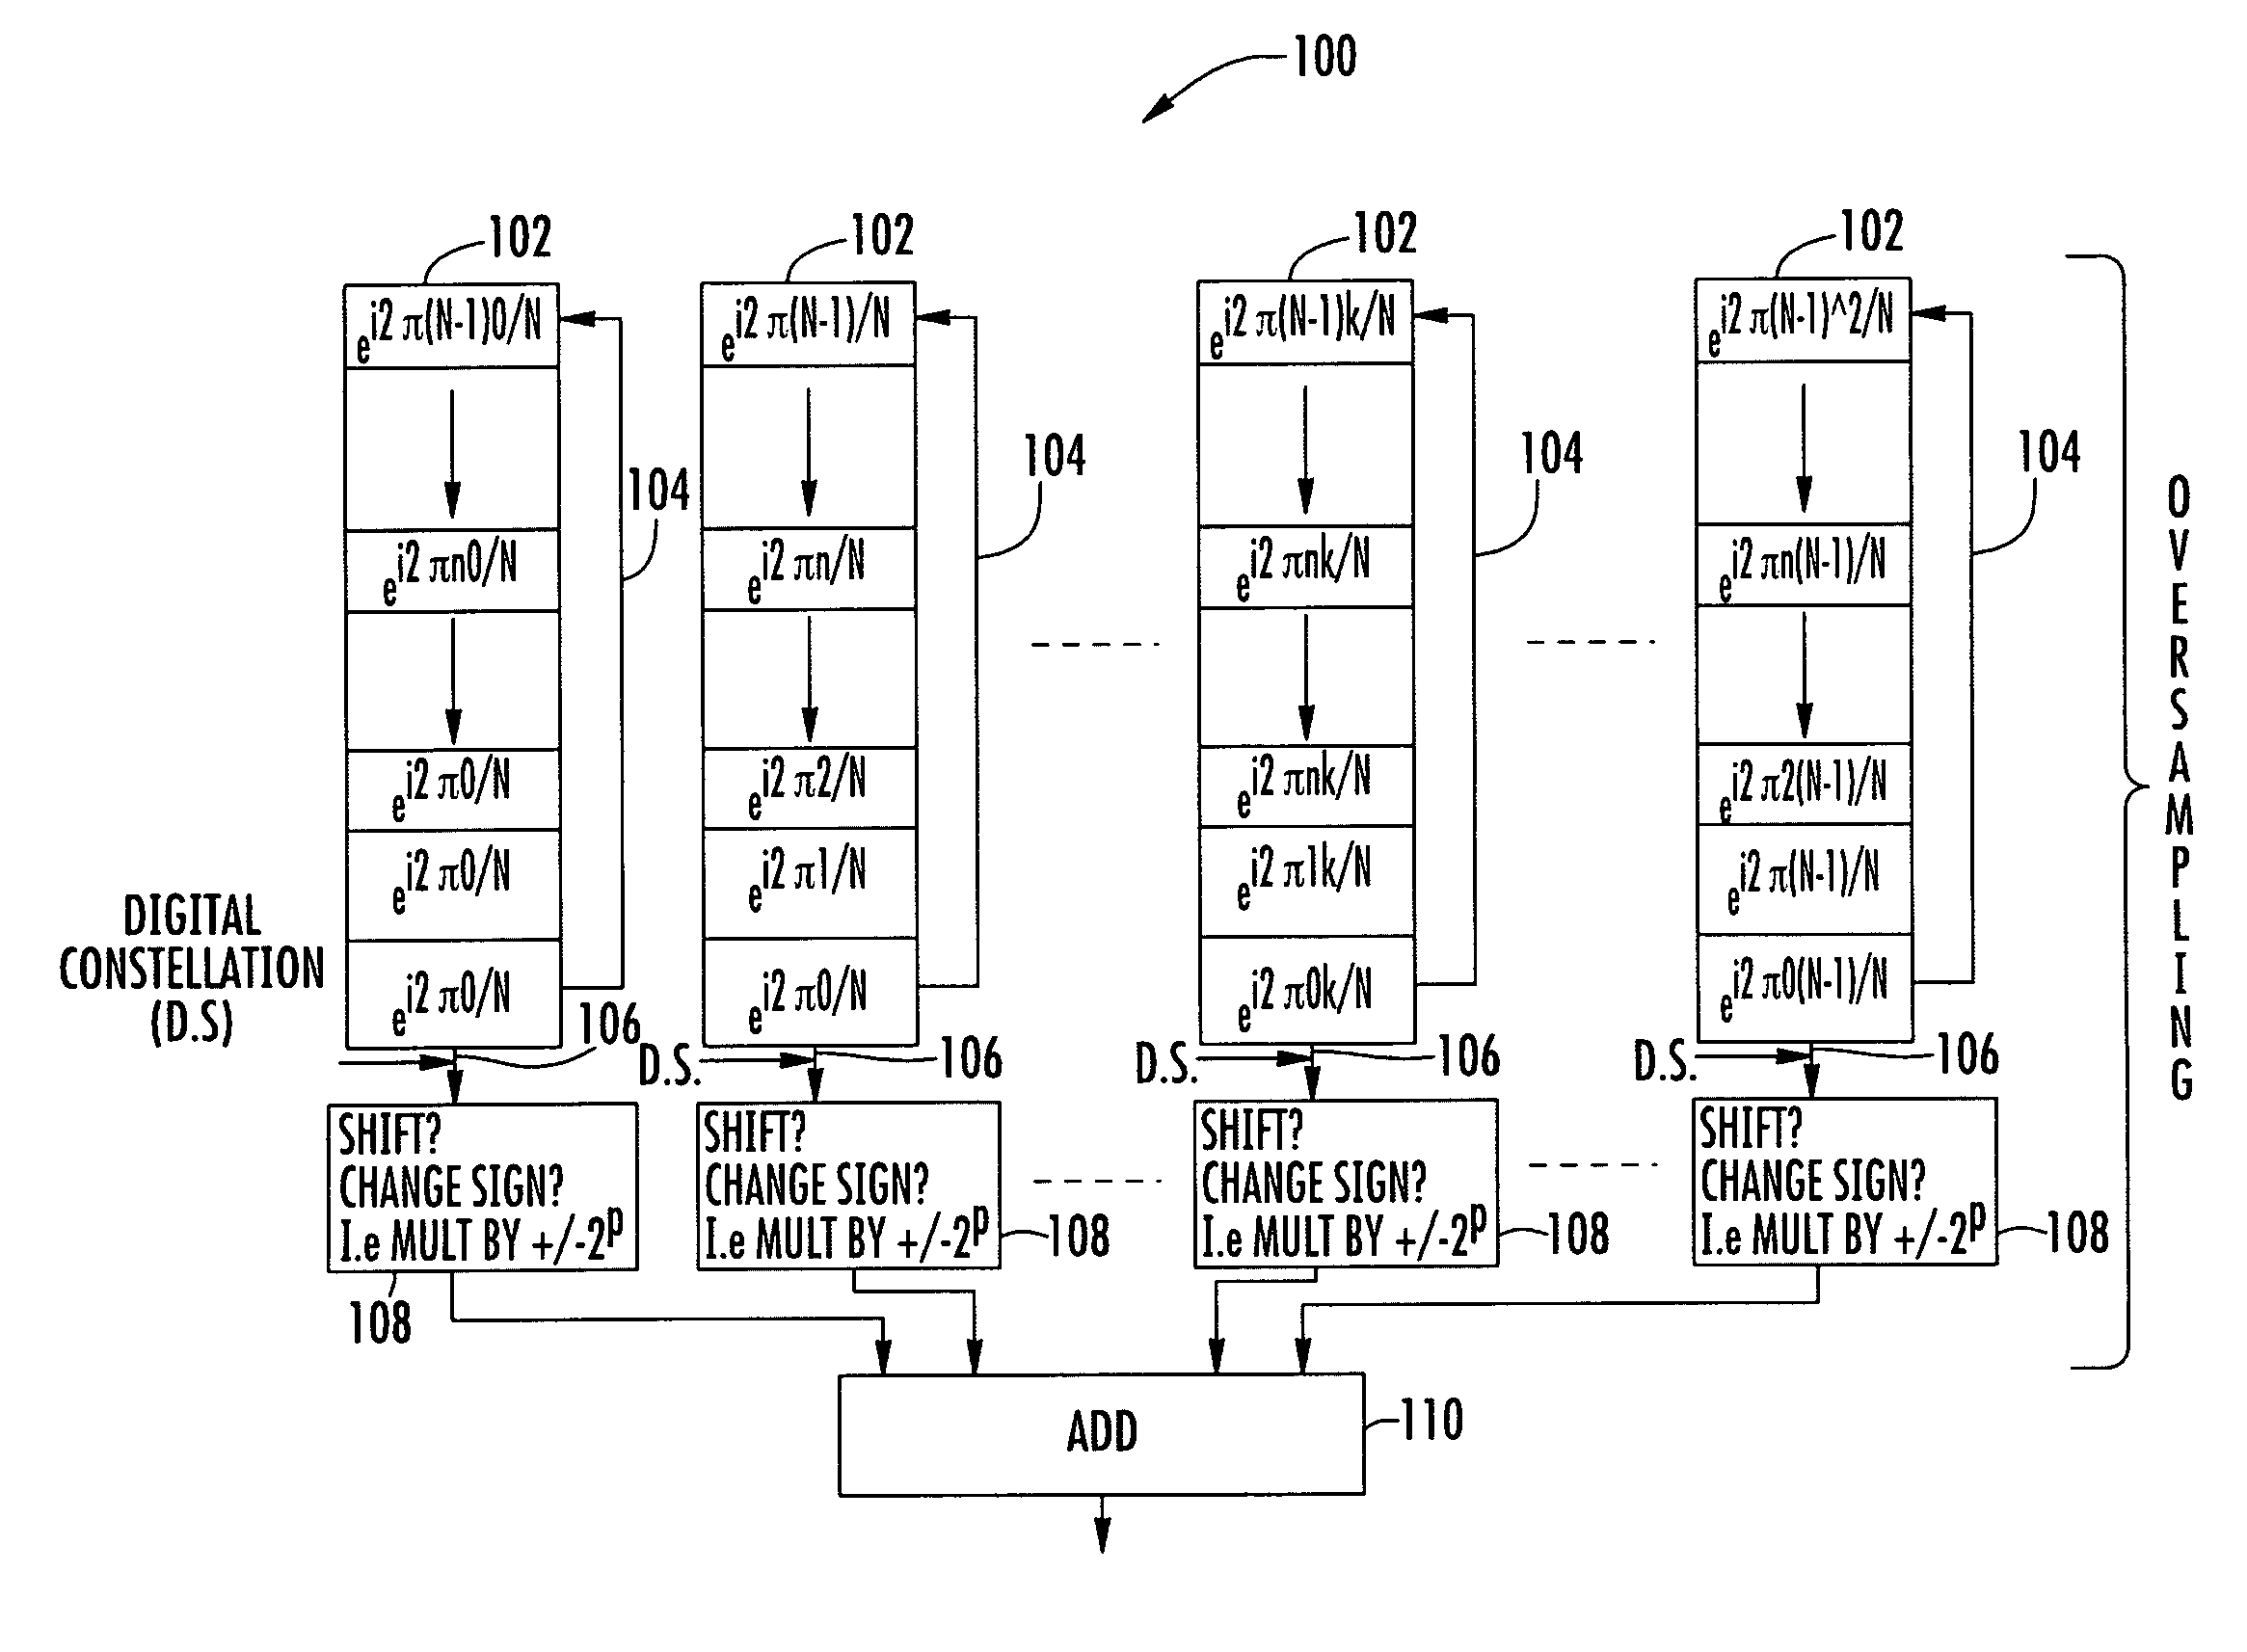 System and method for communicating data using efficient fast fourier transform (FFT) for orthogonal frequency division multiplexing (OFDM) modulation